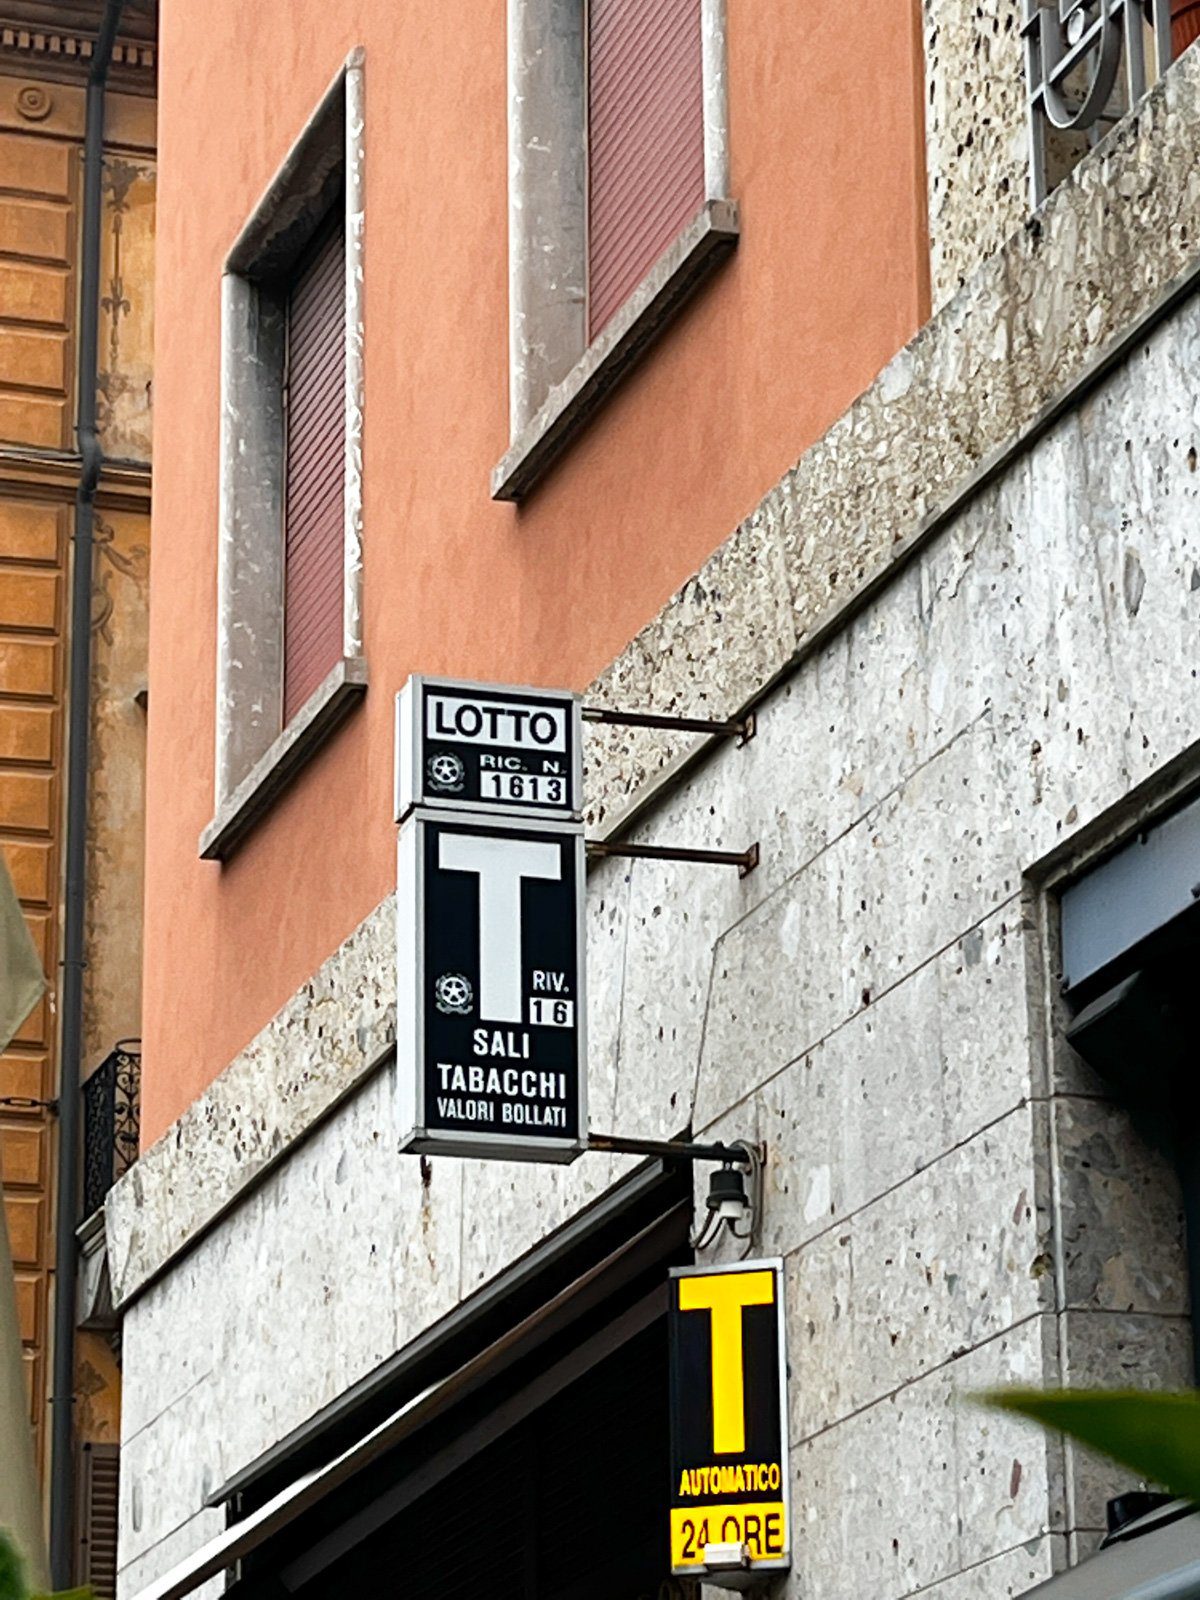 Sign for a tabaccheria in Italy, where you can buy bus tickets, stamps, and cigarettes.